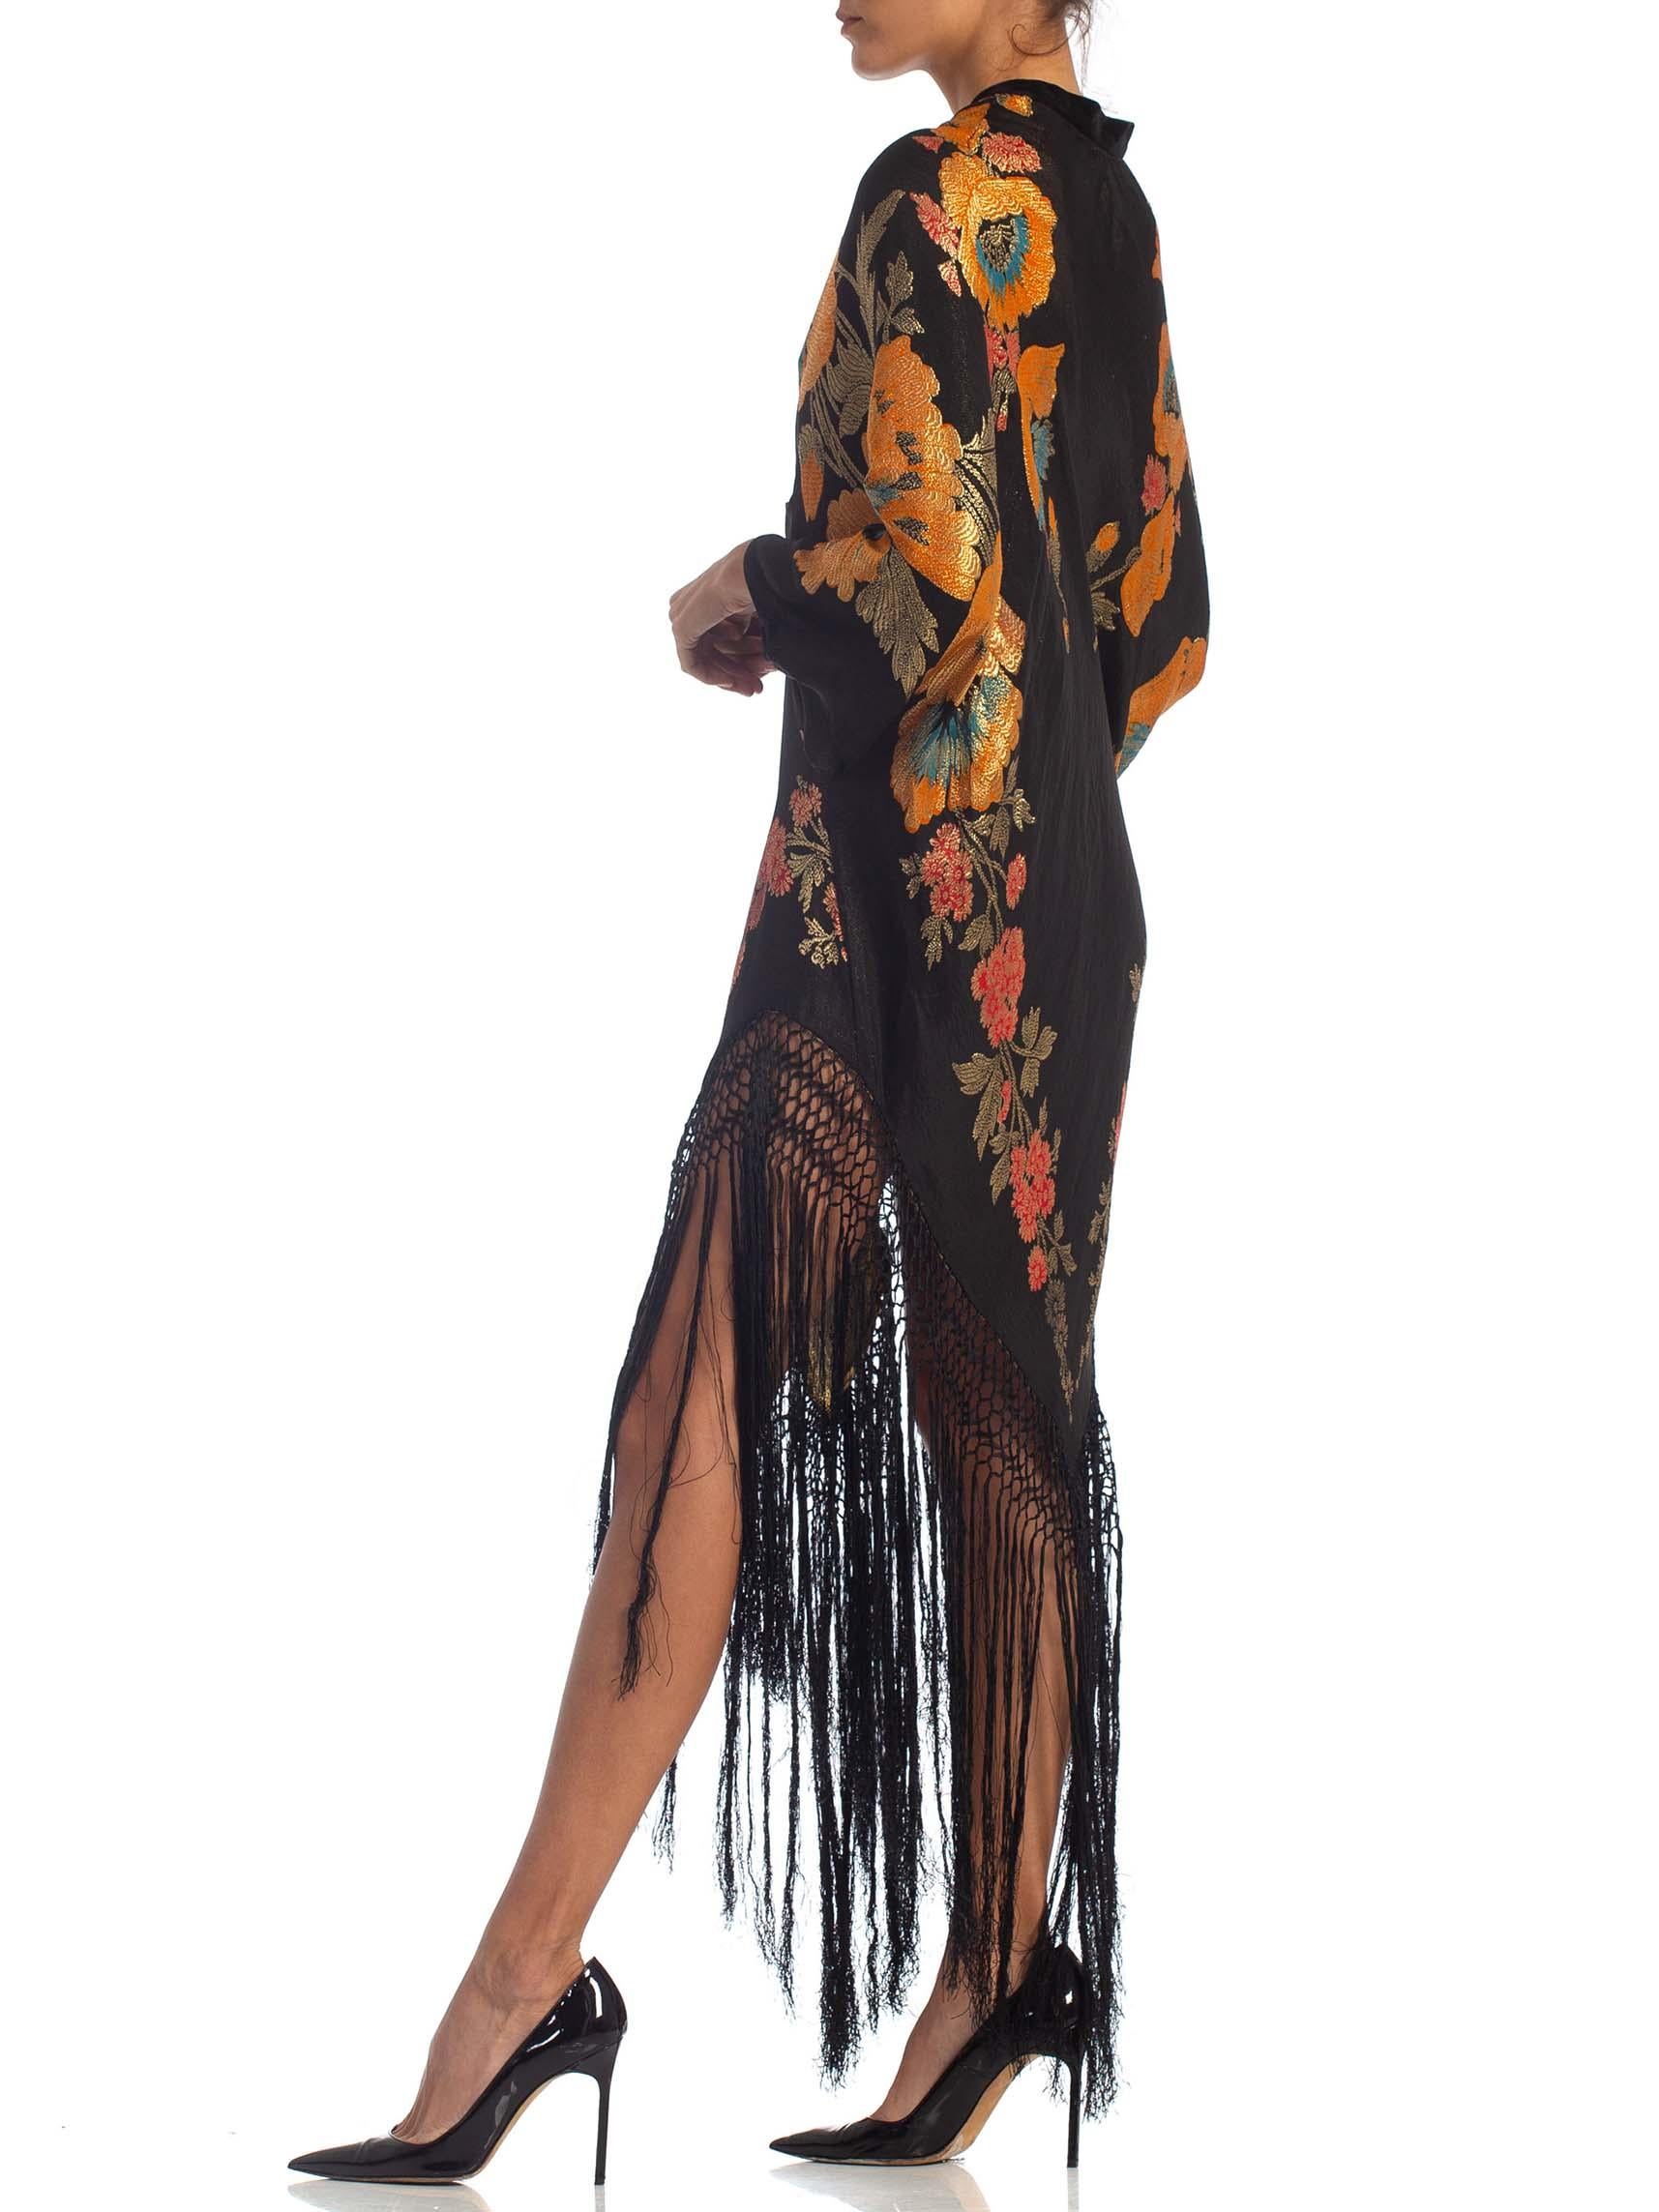 MORPHEW COLLECTION Floral Gold Lamé Silk Tunic Dress With Fringe 1